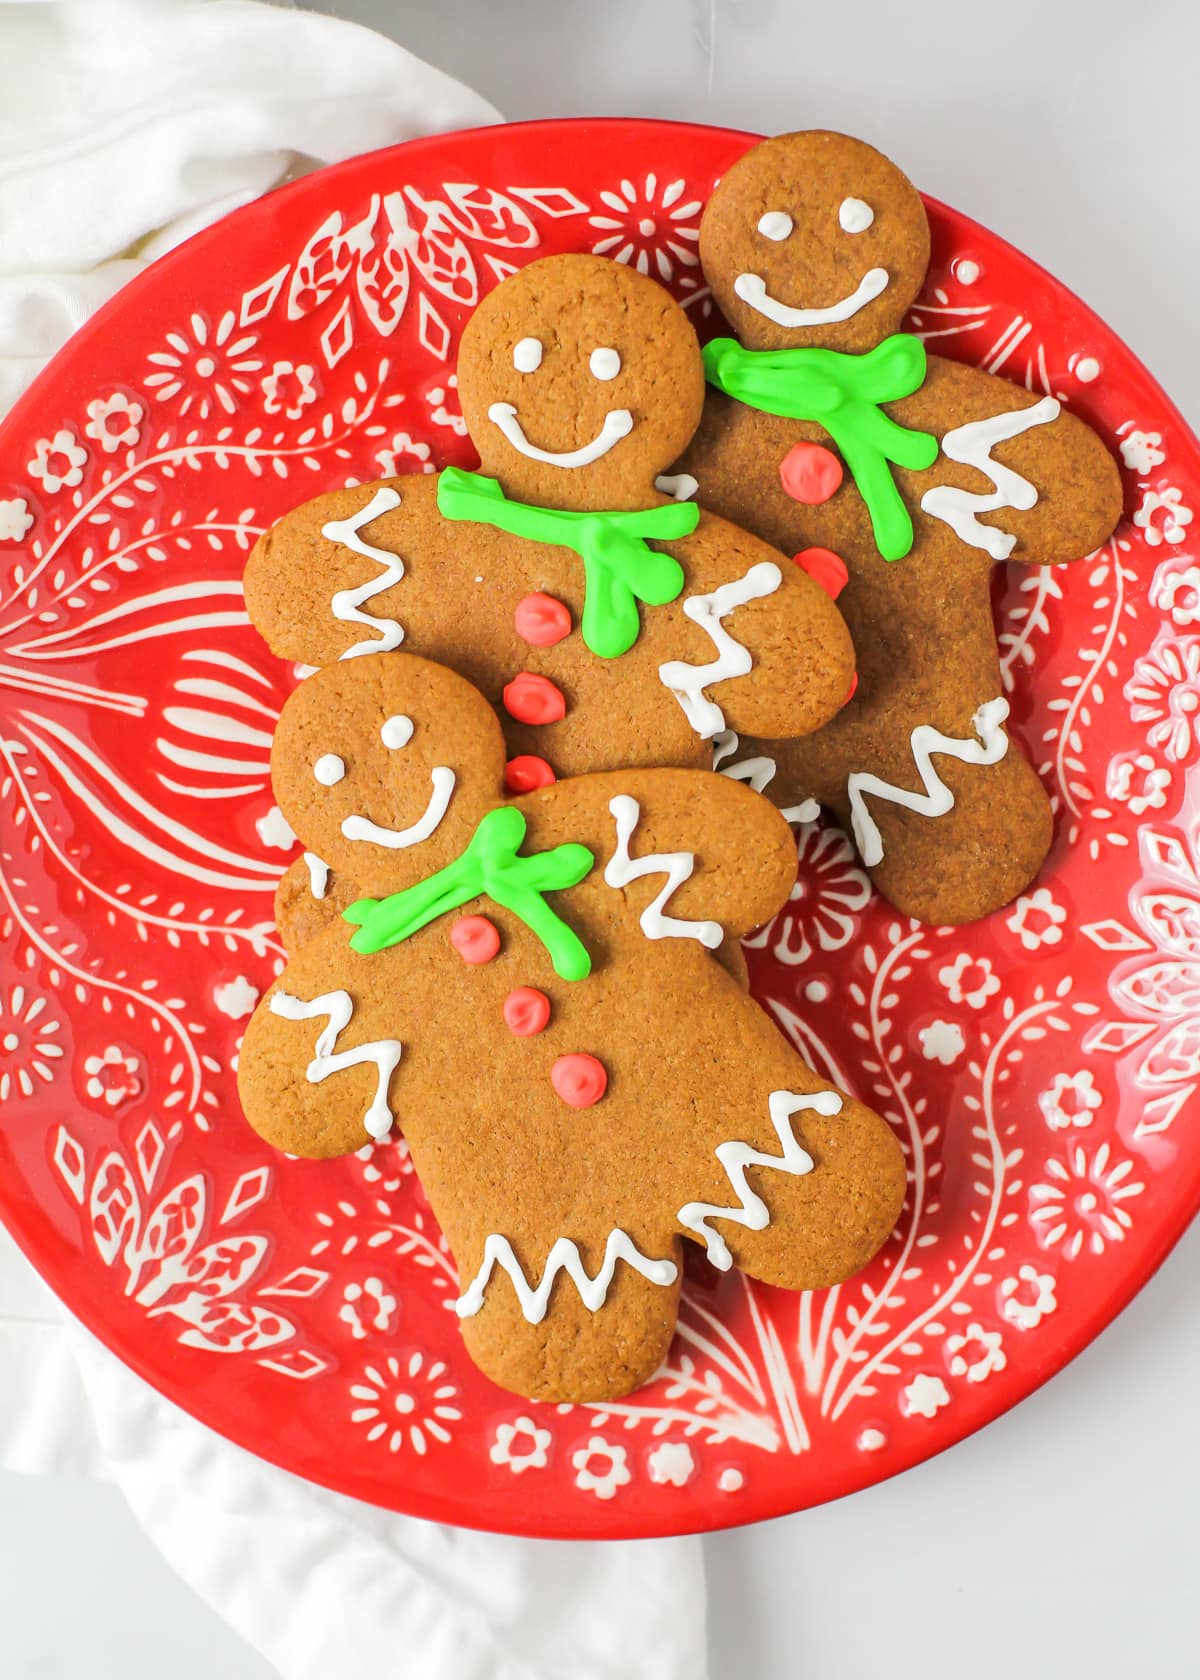 Holiday Prints Parchment Paper Sheets - Bake Serve Store Foods 24 Sheets  10 X 15 (Gingerbread Men)